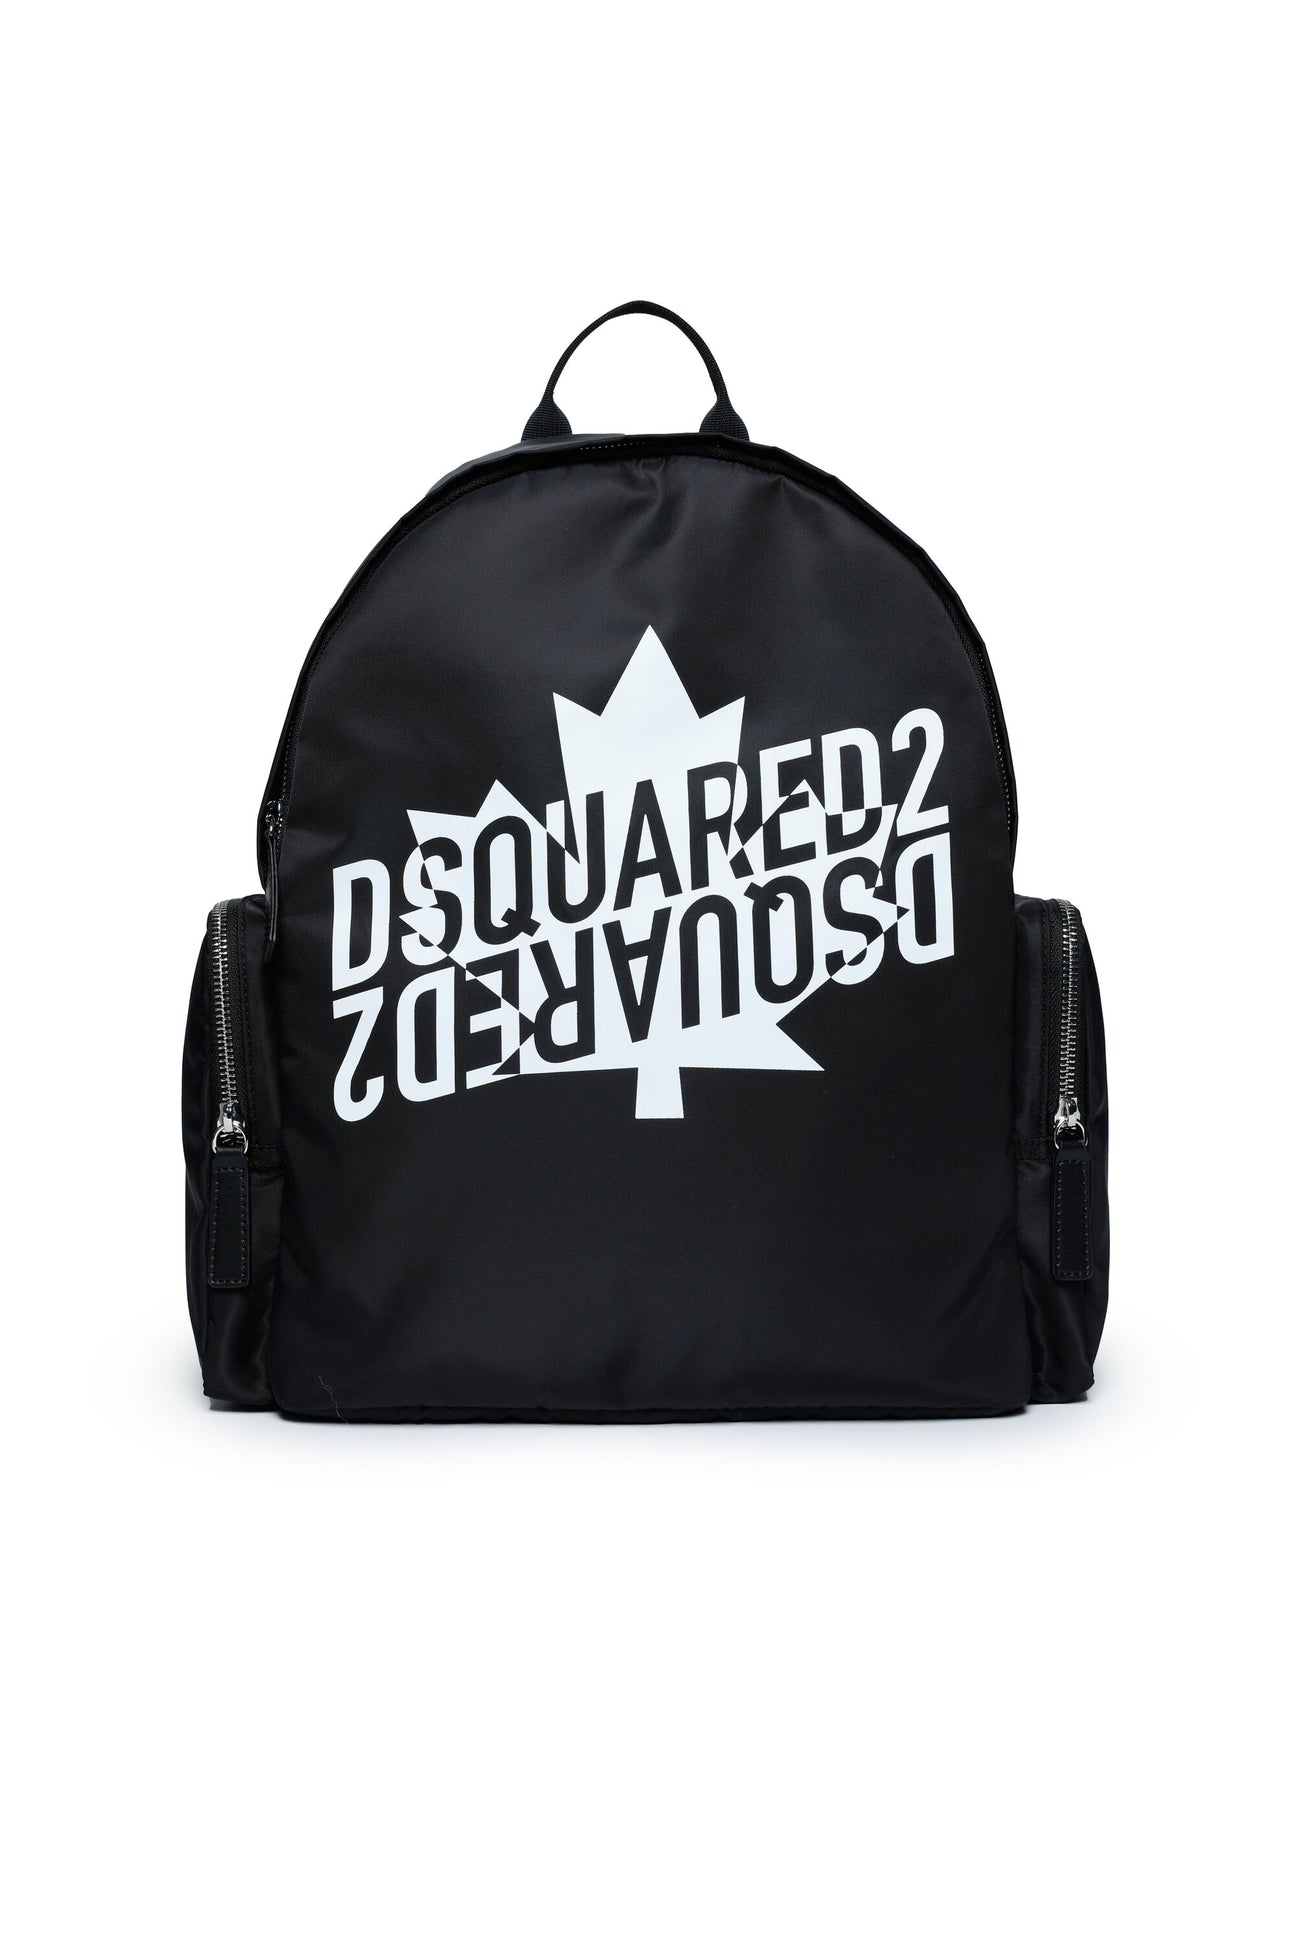 Backpack with side pockets and mirrored logo Backpack with side pockets and mirrored logo